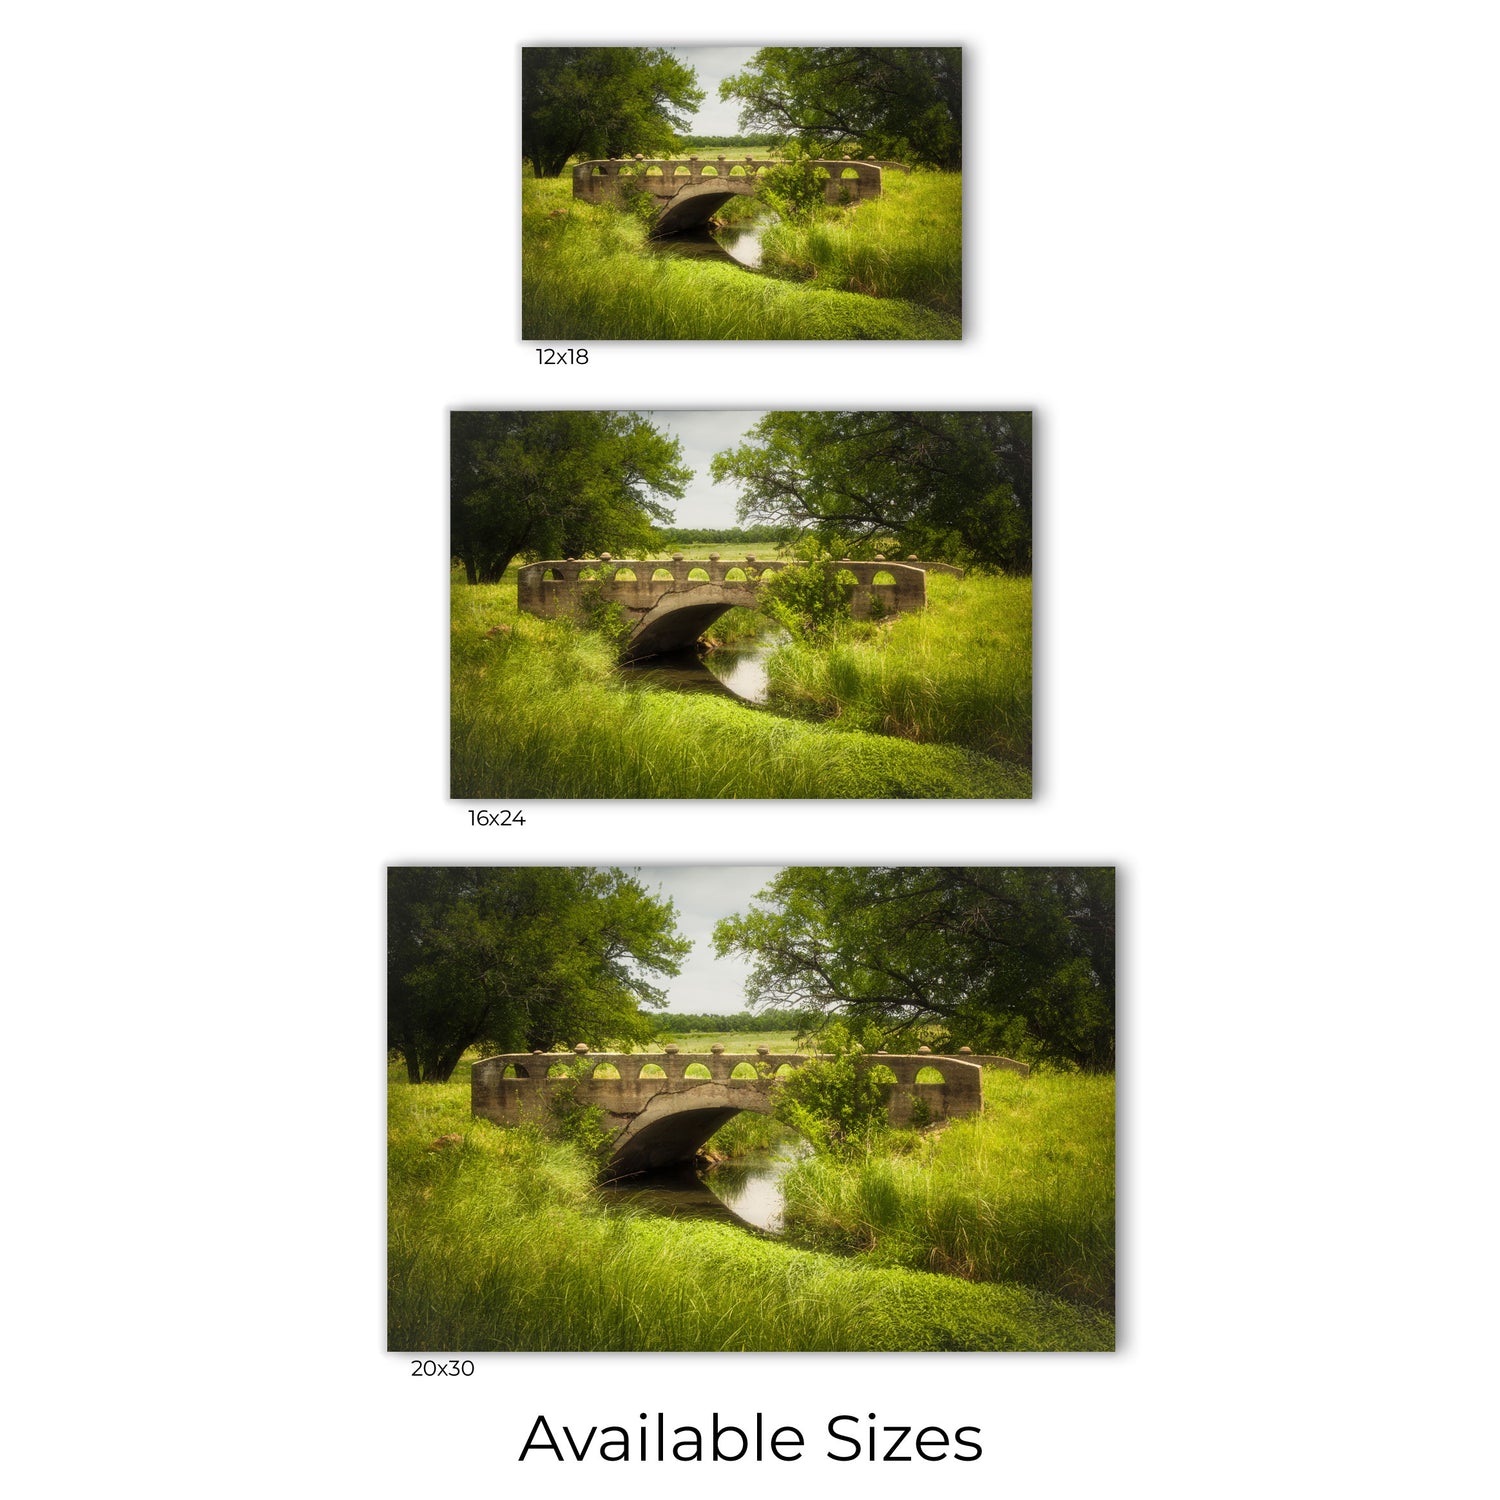 Visual representation of the bridge canvas wall art print sizes available: 12x18, 16x24 and 20x30.